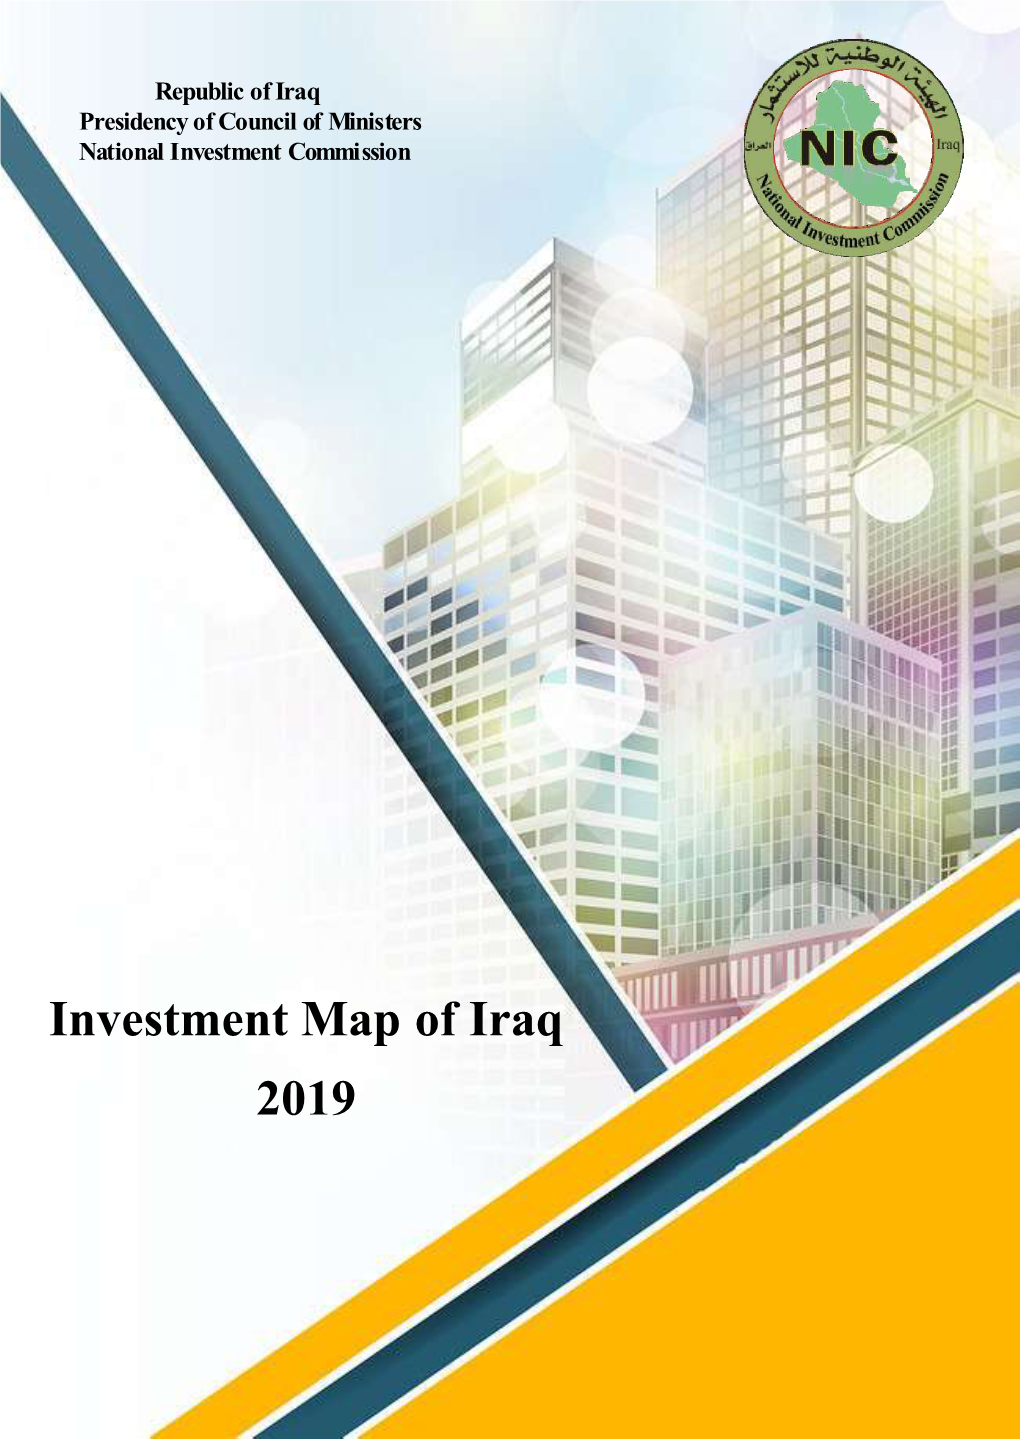 Investment Map of Iraq 2019 Republic of Iraq Presidency of Council of Ministers National Investment Commission